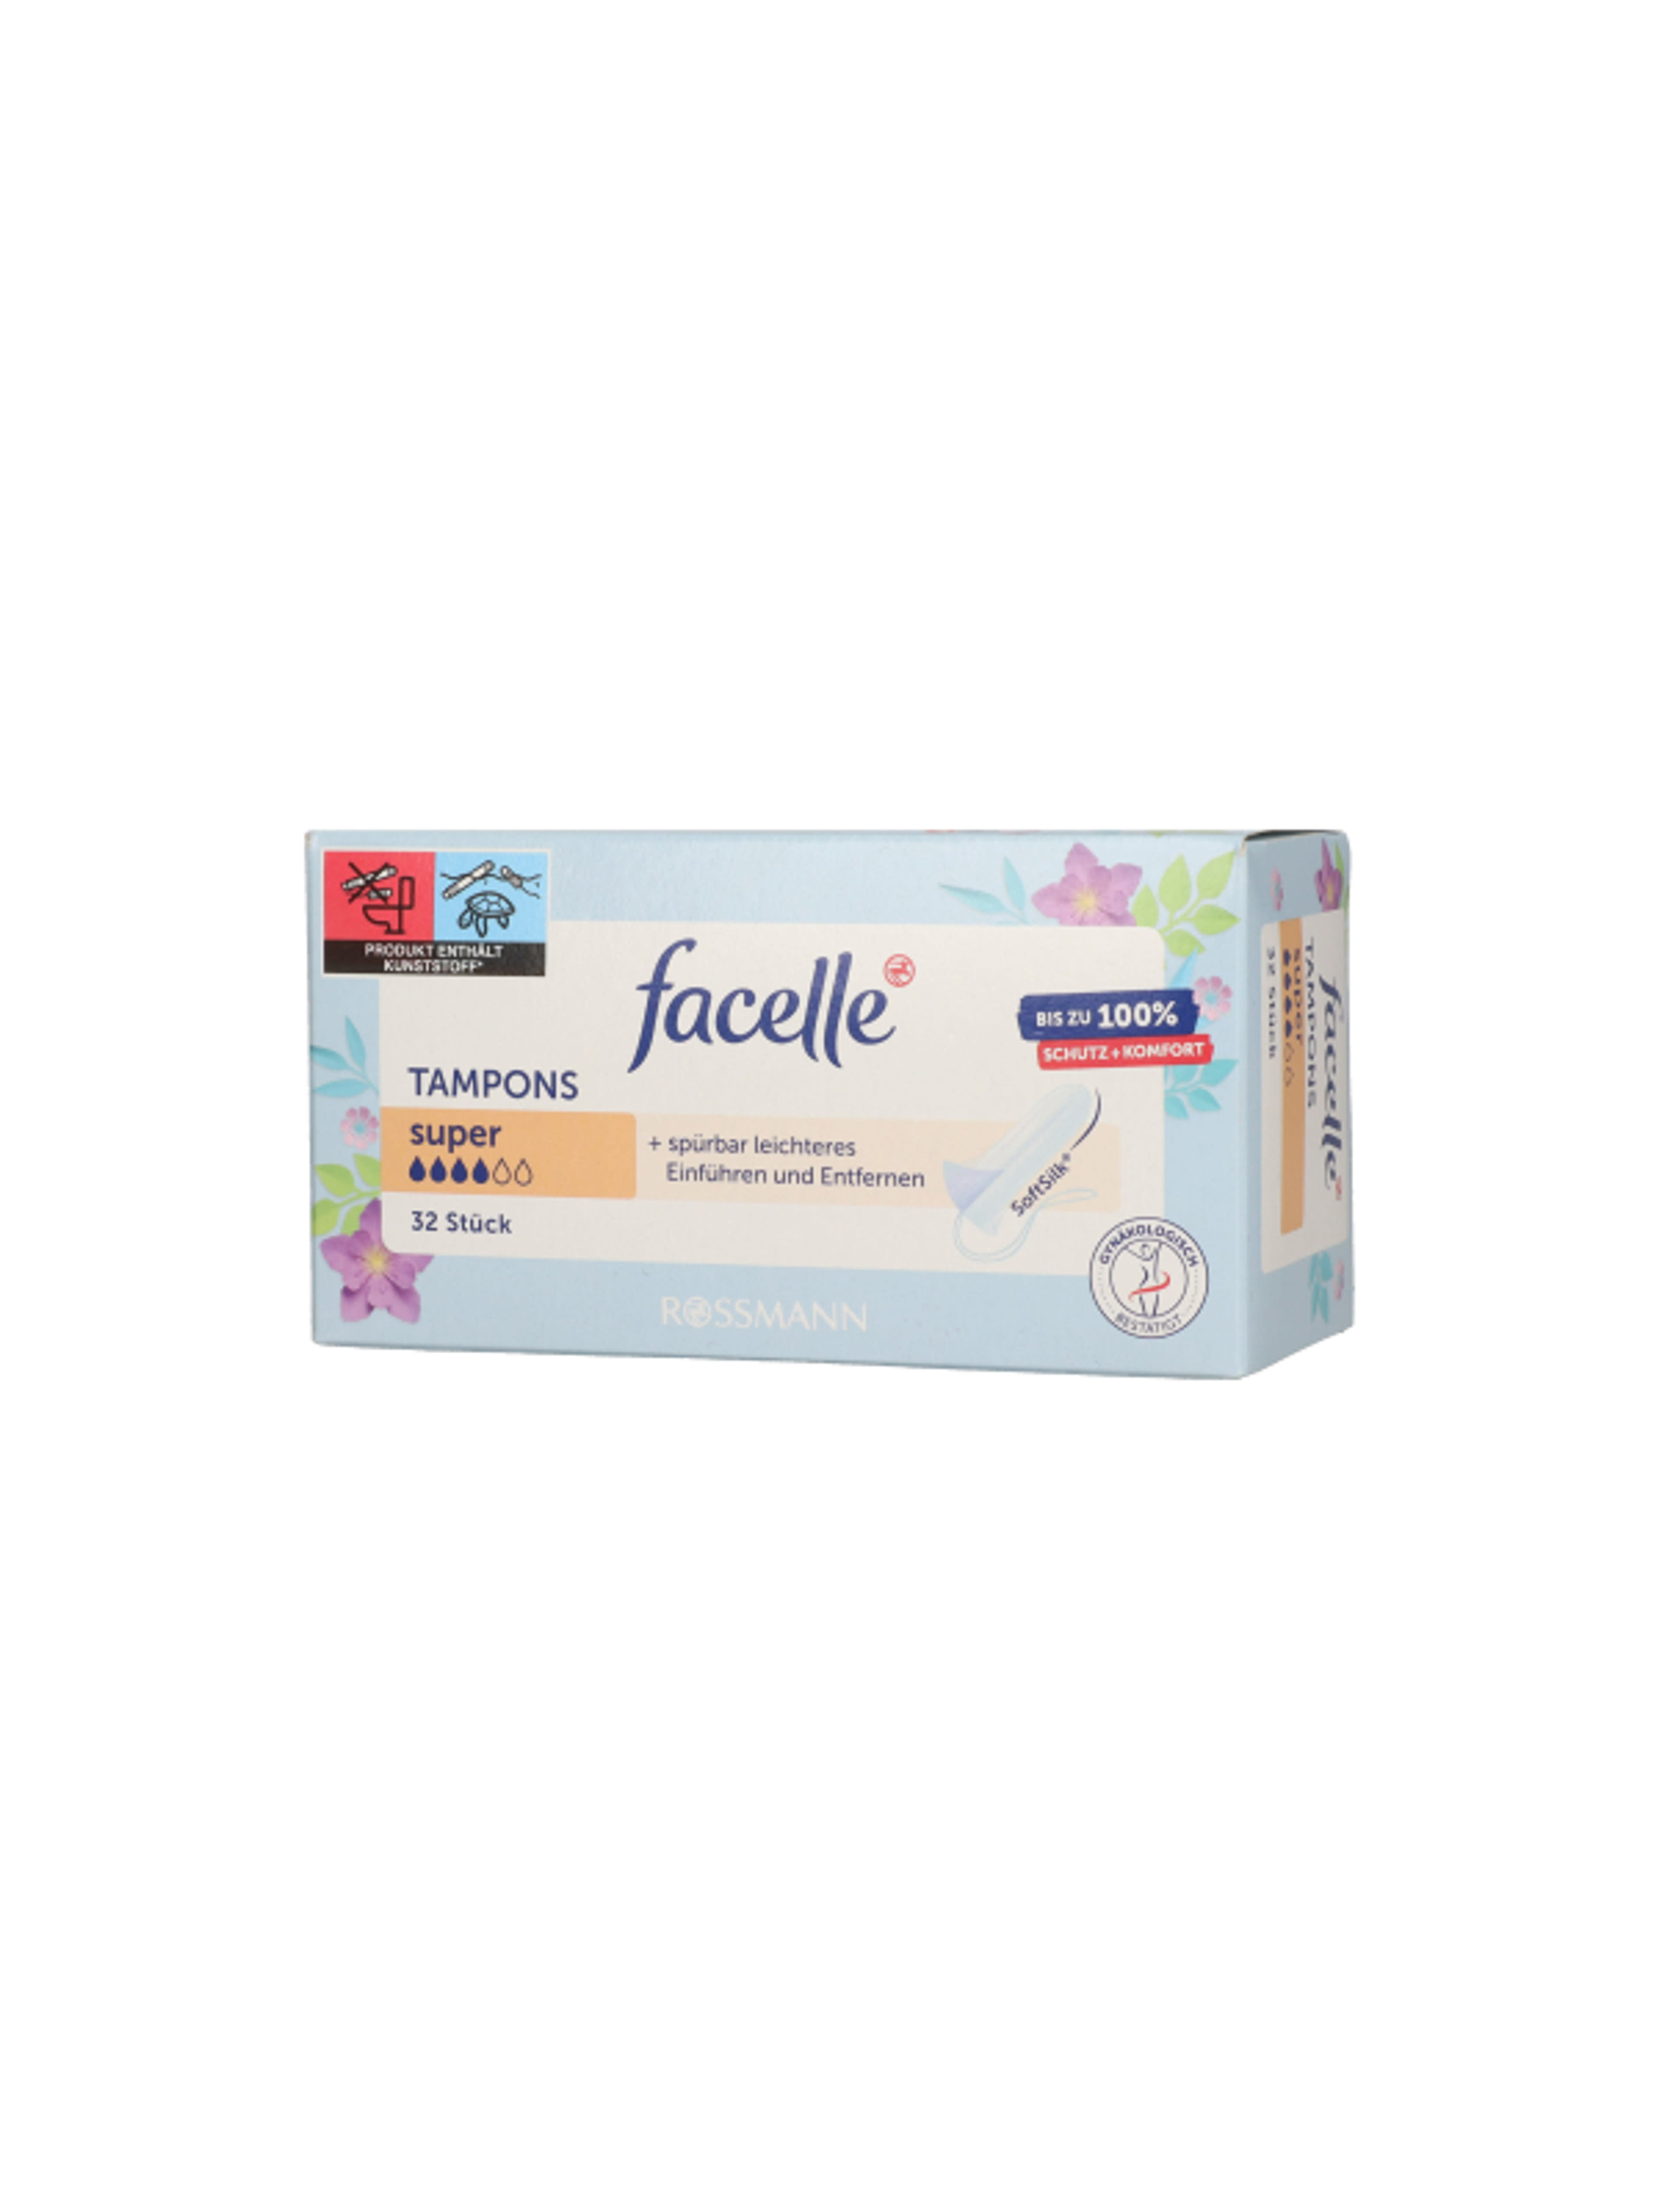 Facelle tampon, super - 32 db-5